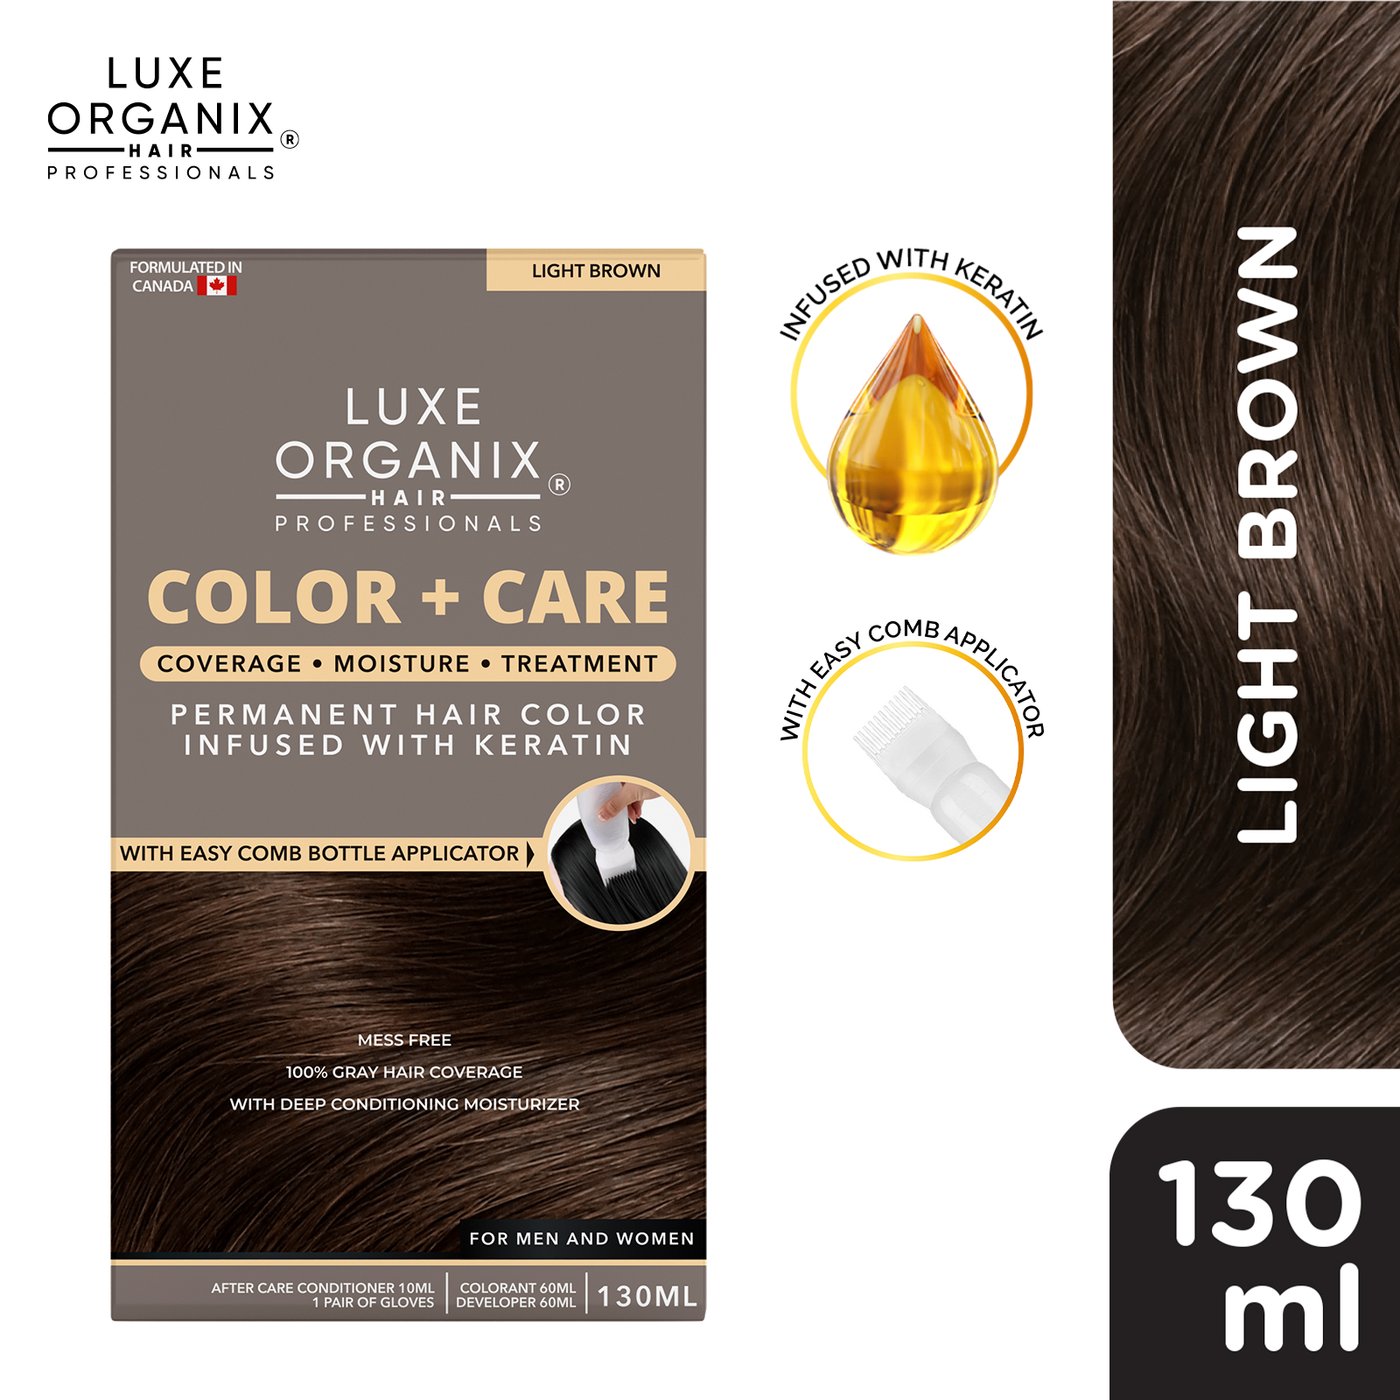 Luxe Organix Color + Care Permanent Hair Color 130ml (Light Brown)